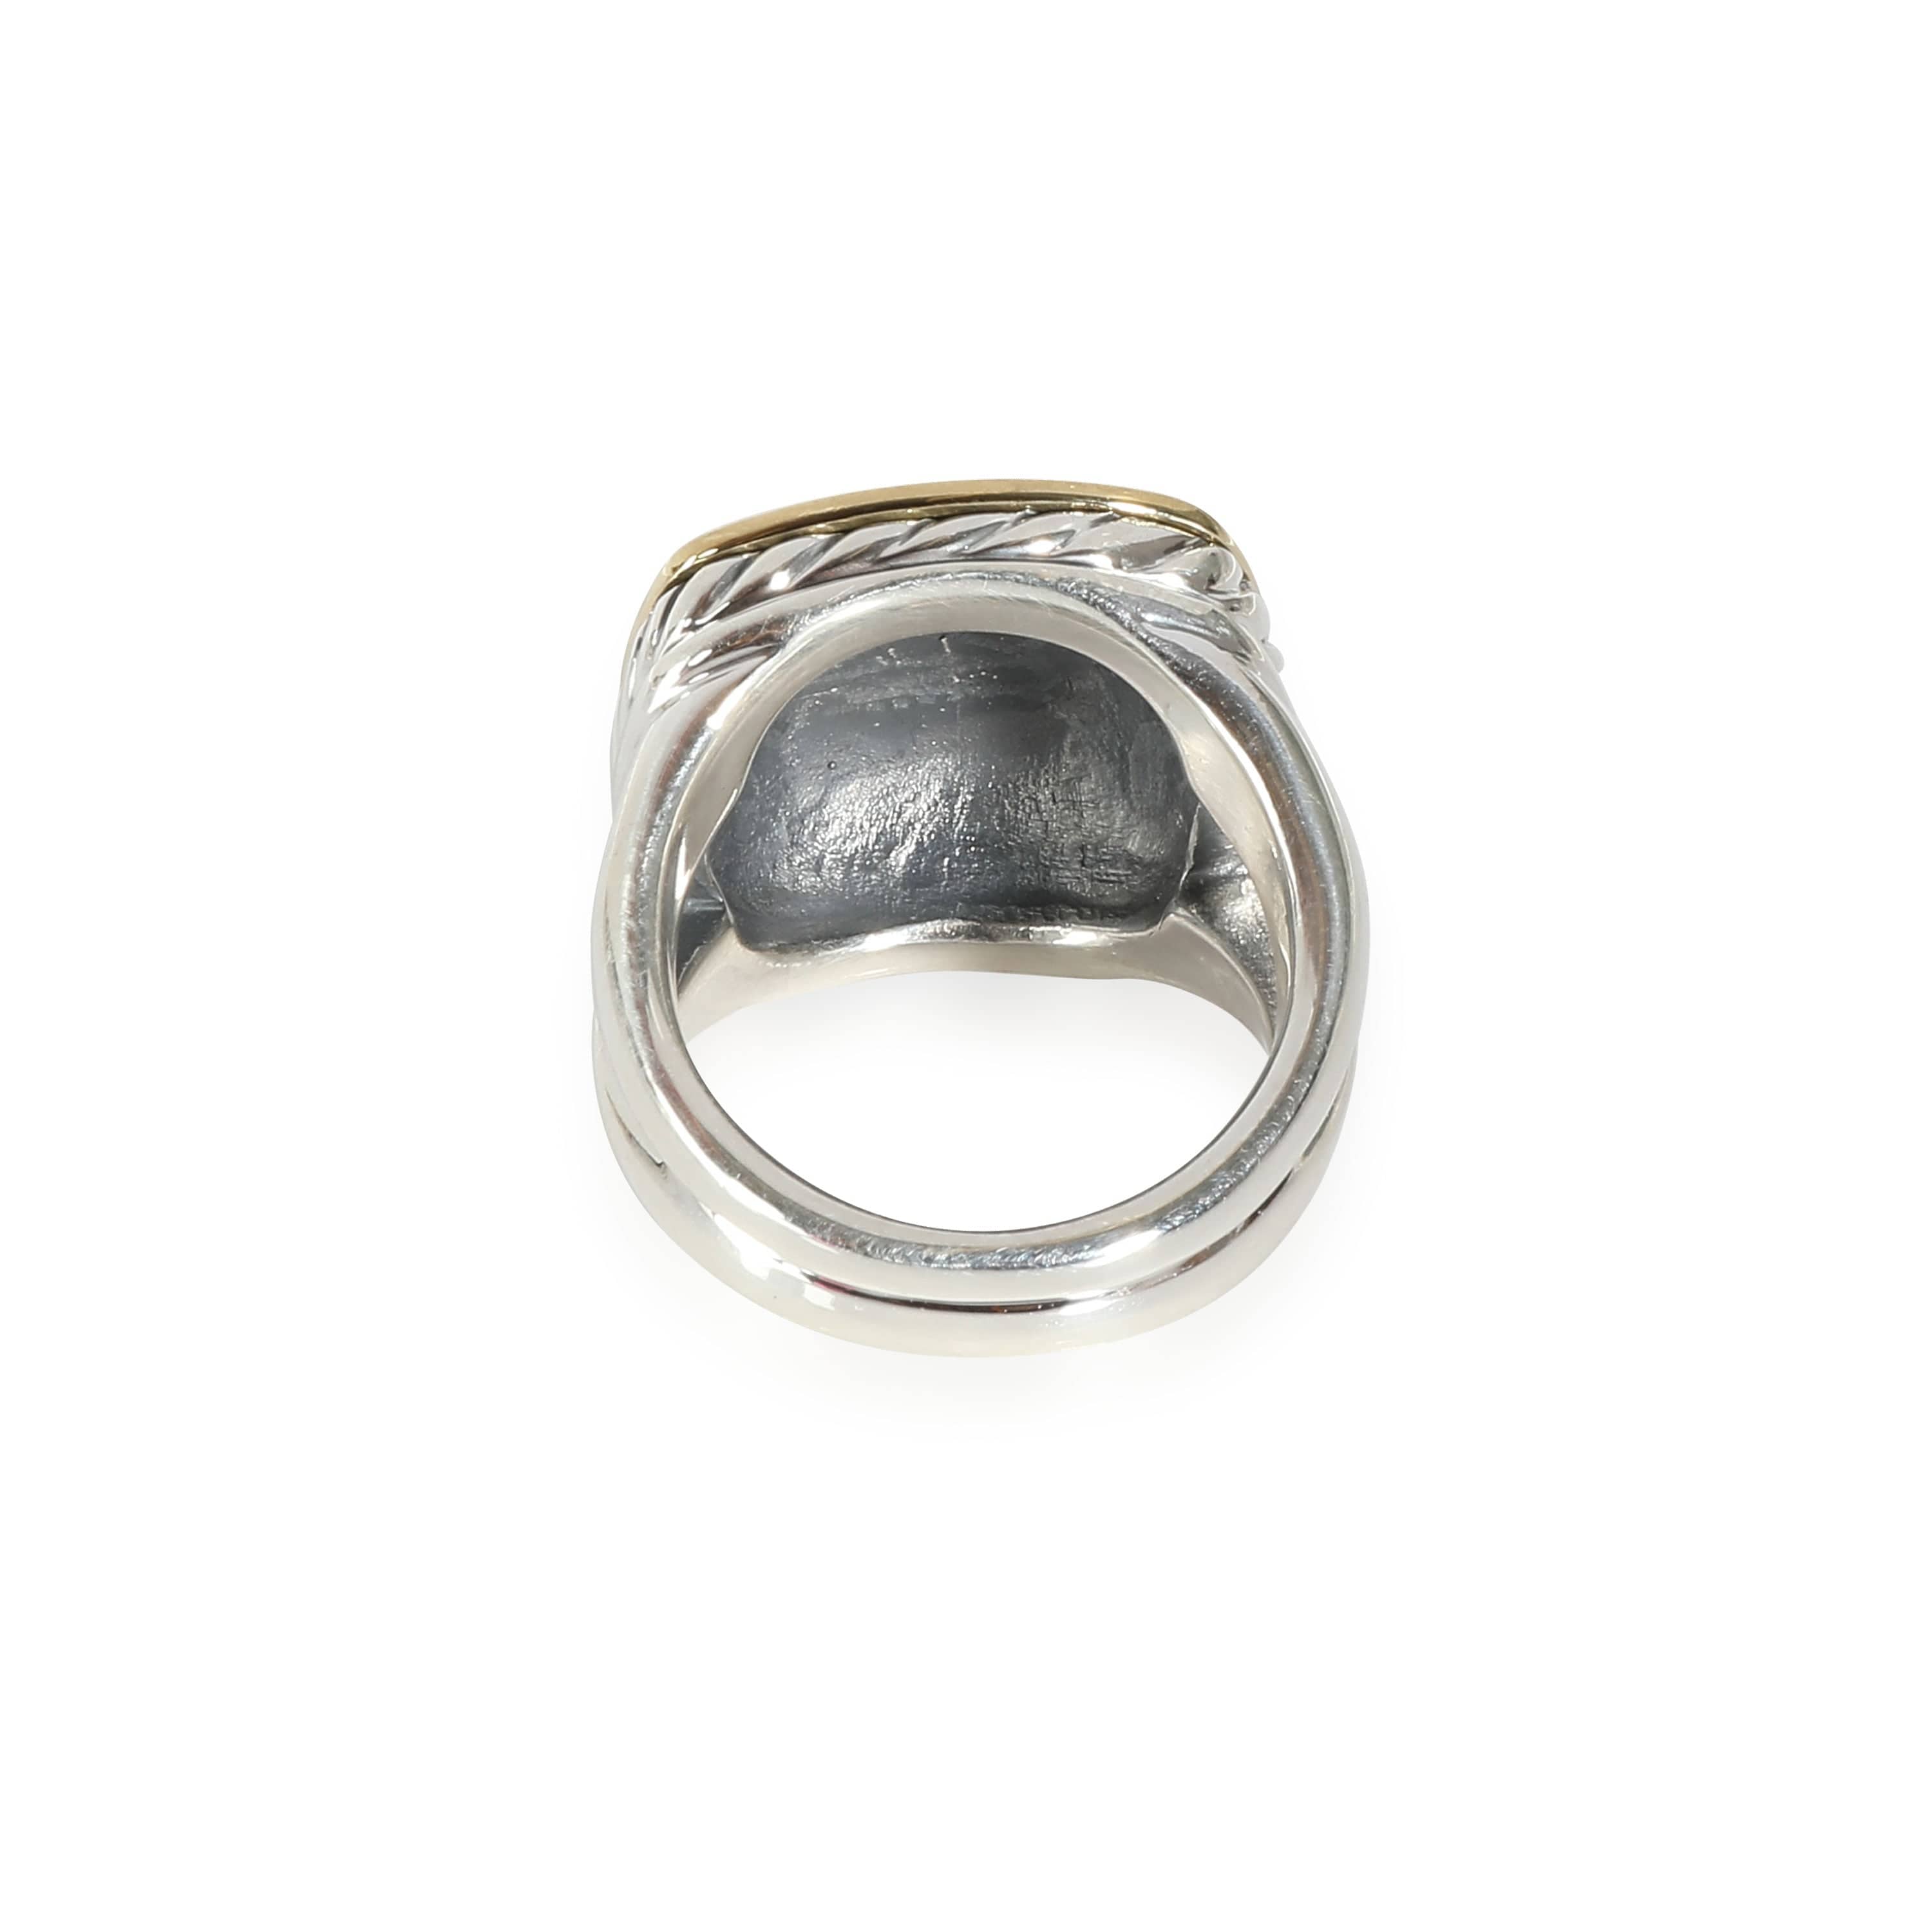 David Yurman Sculpted Cable Ring in 18k Yellow Gold/Sterling Silver